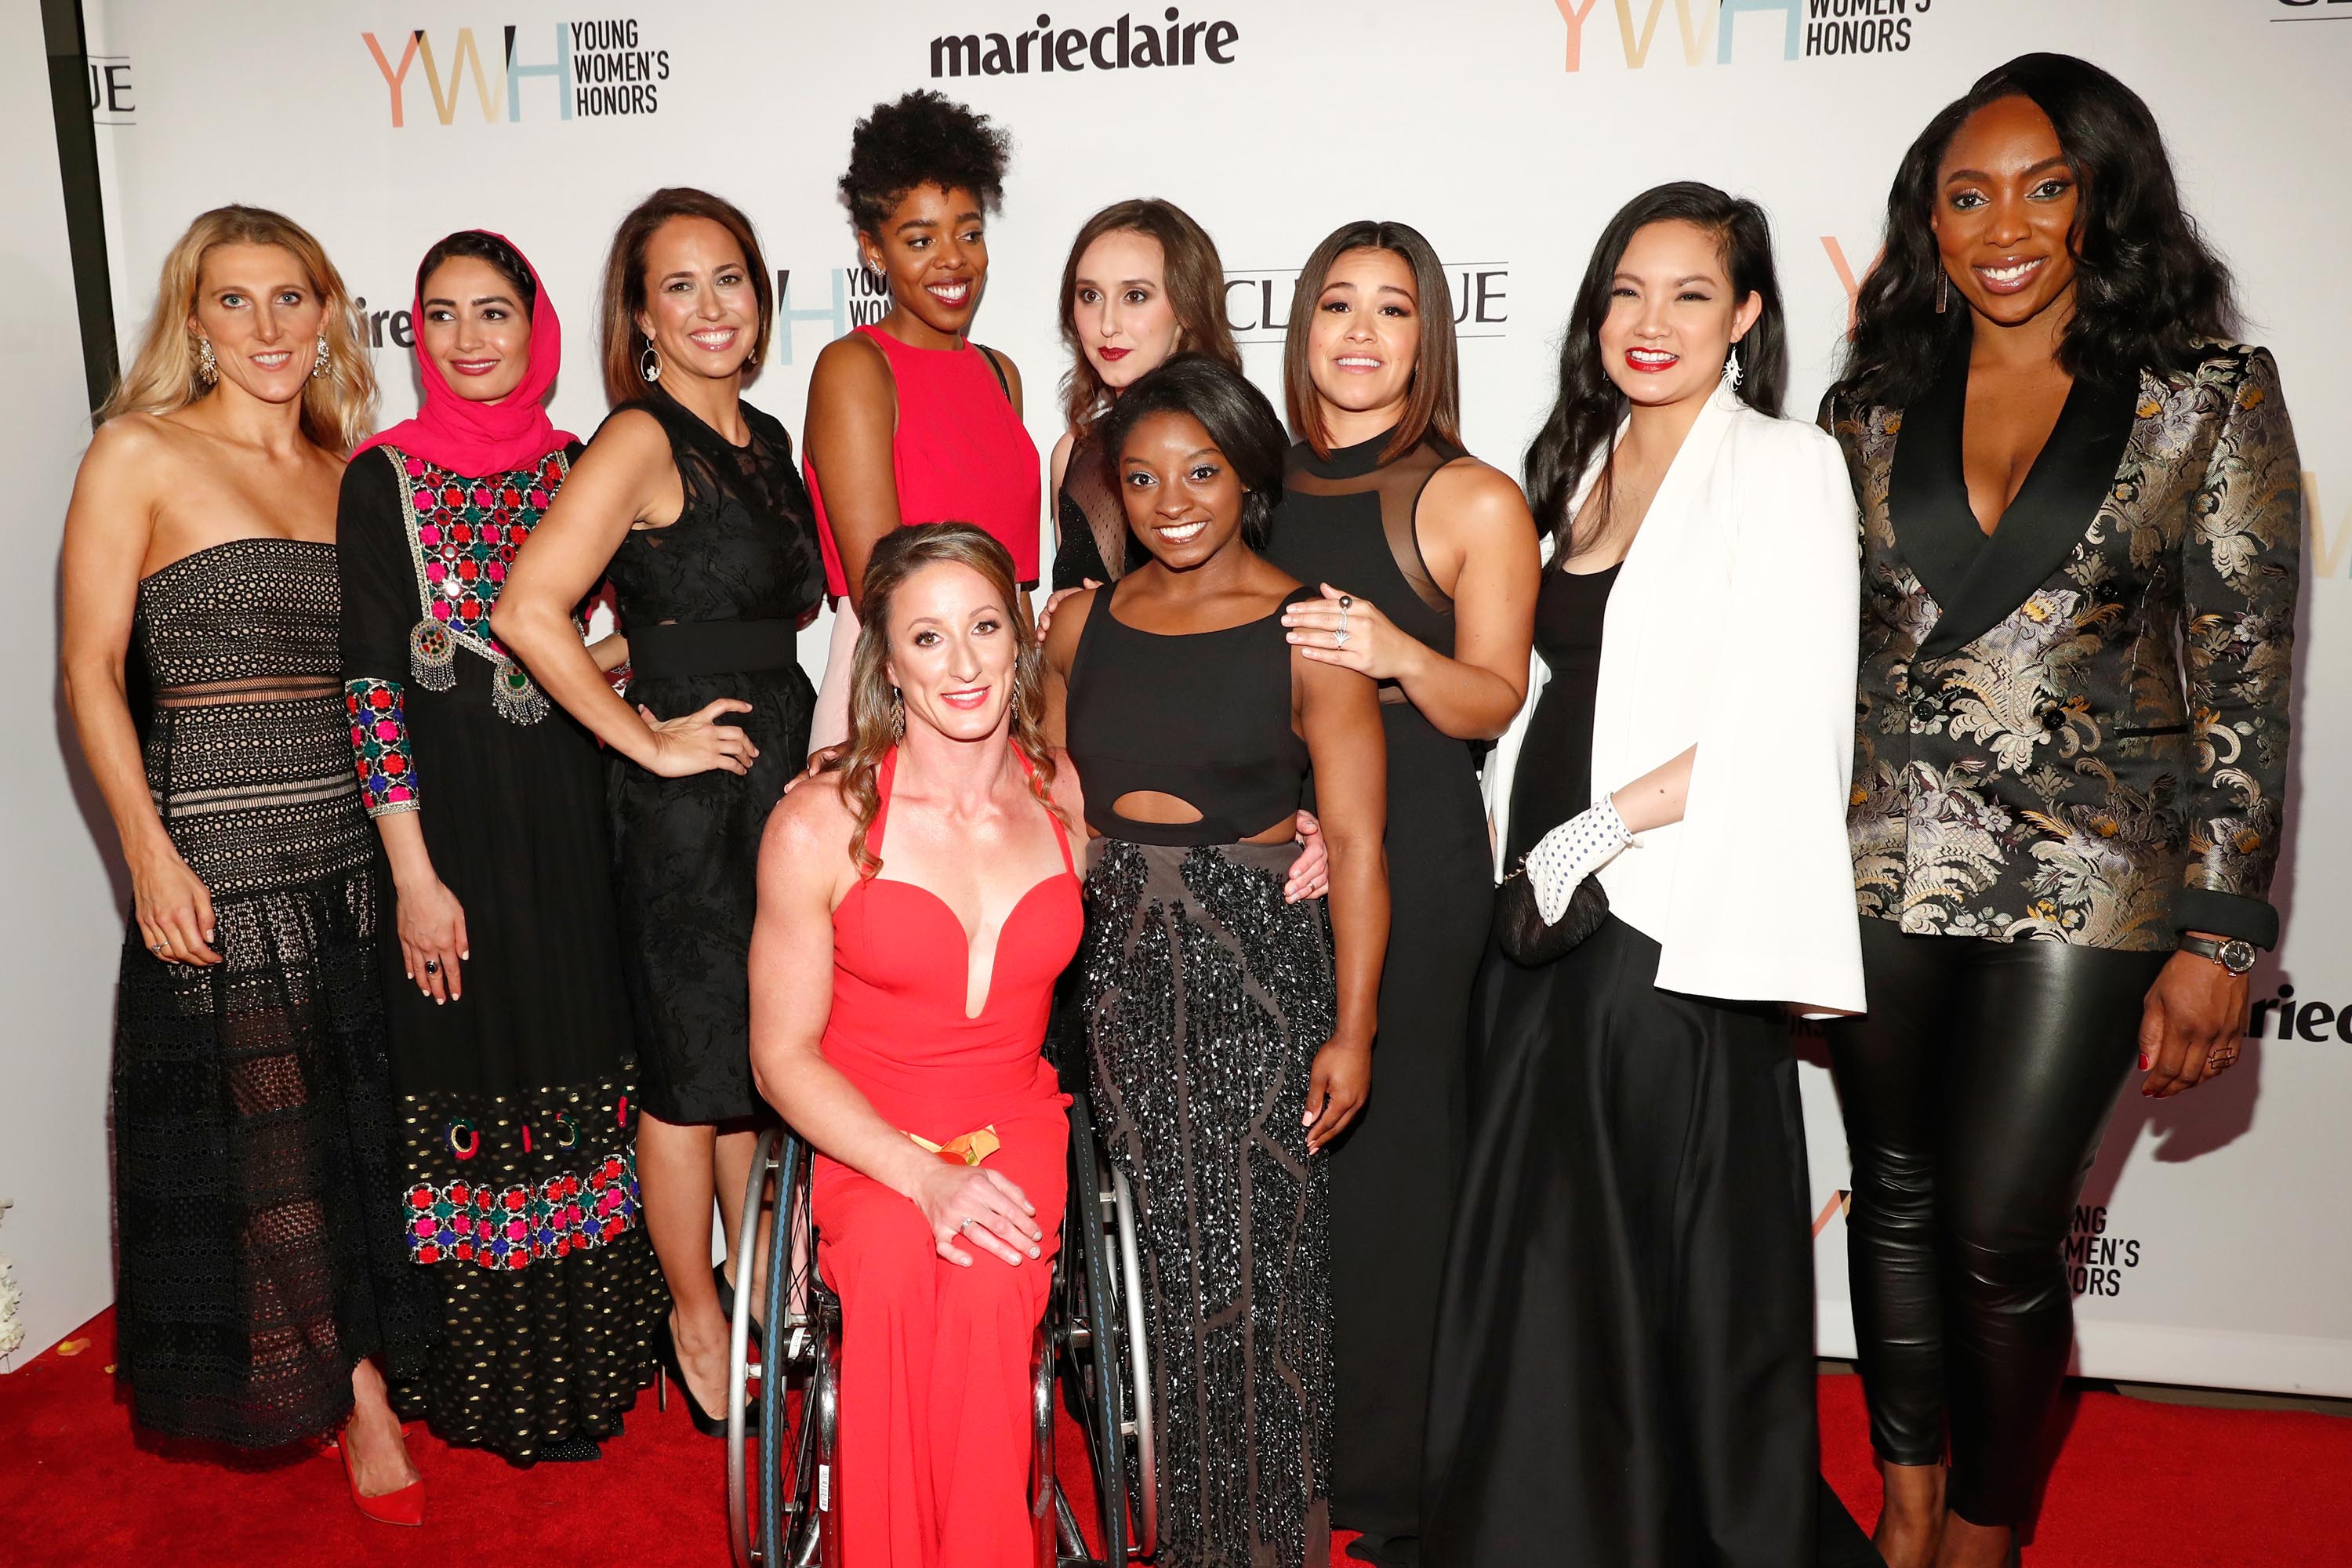 Jessica Matthews arrives at the 1st Annual Marie Claire Young Women’s Honors